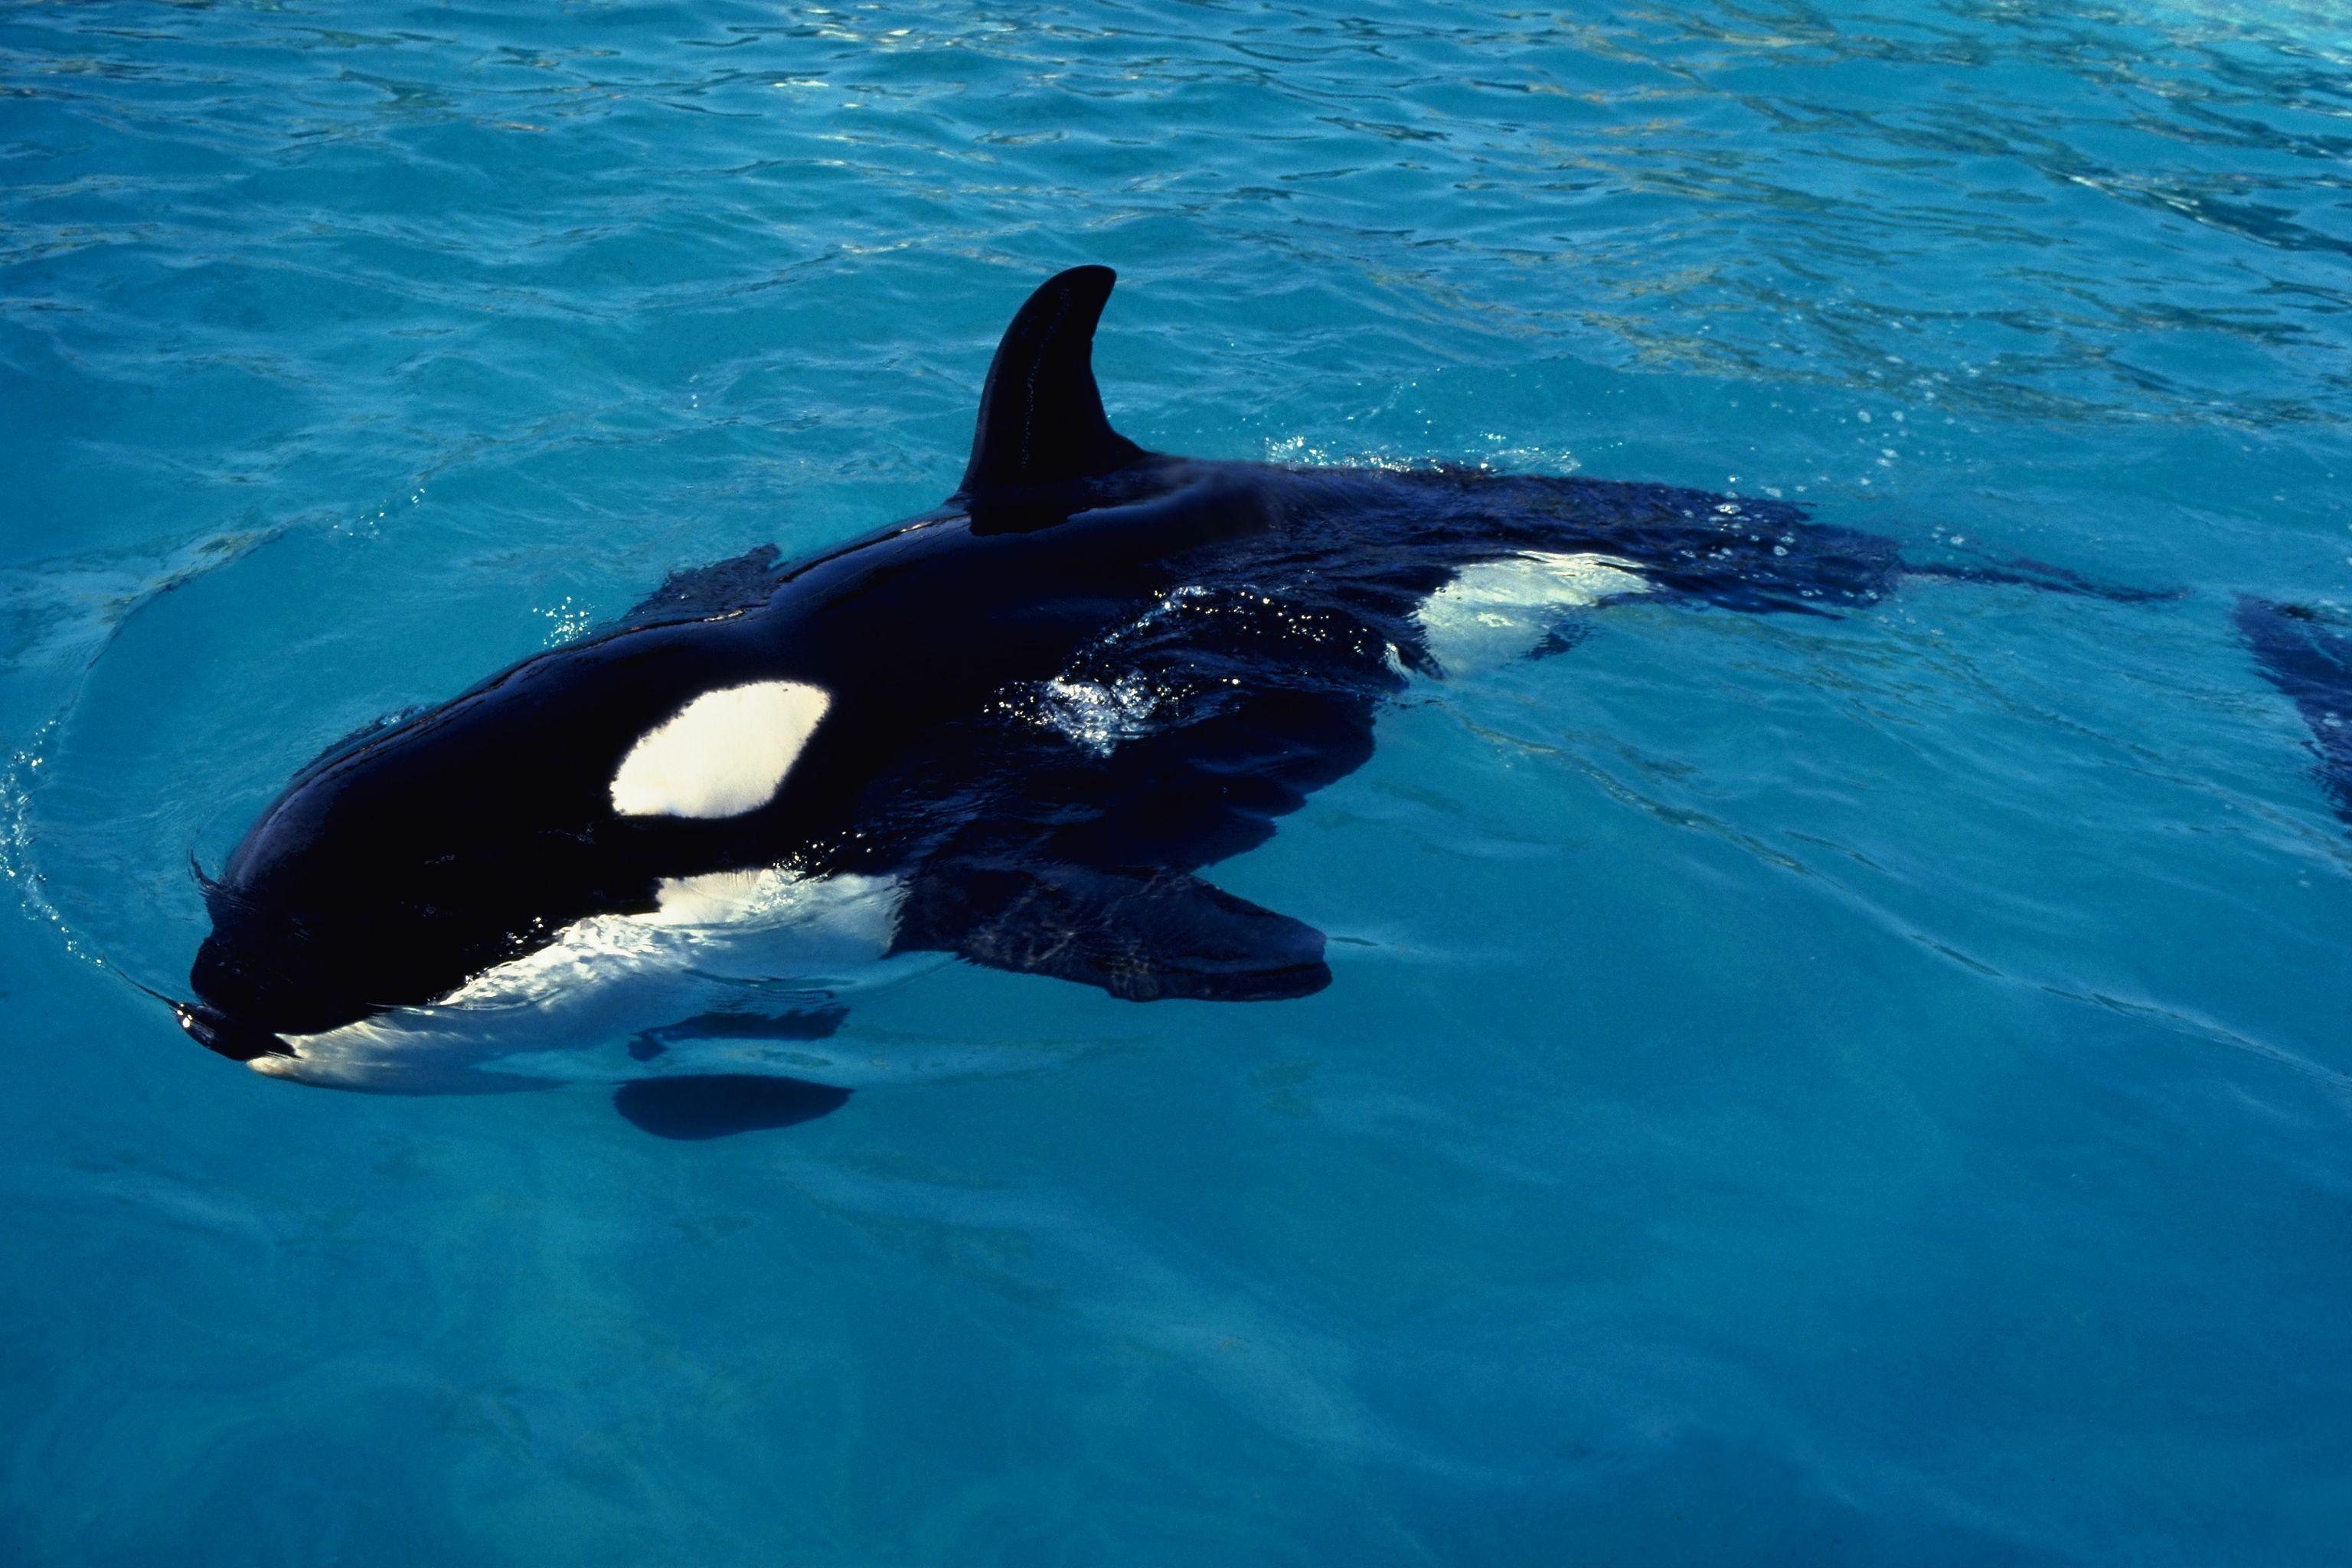 water animals orca killer whales 3072x2048 wallpaper High Quality